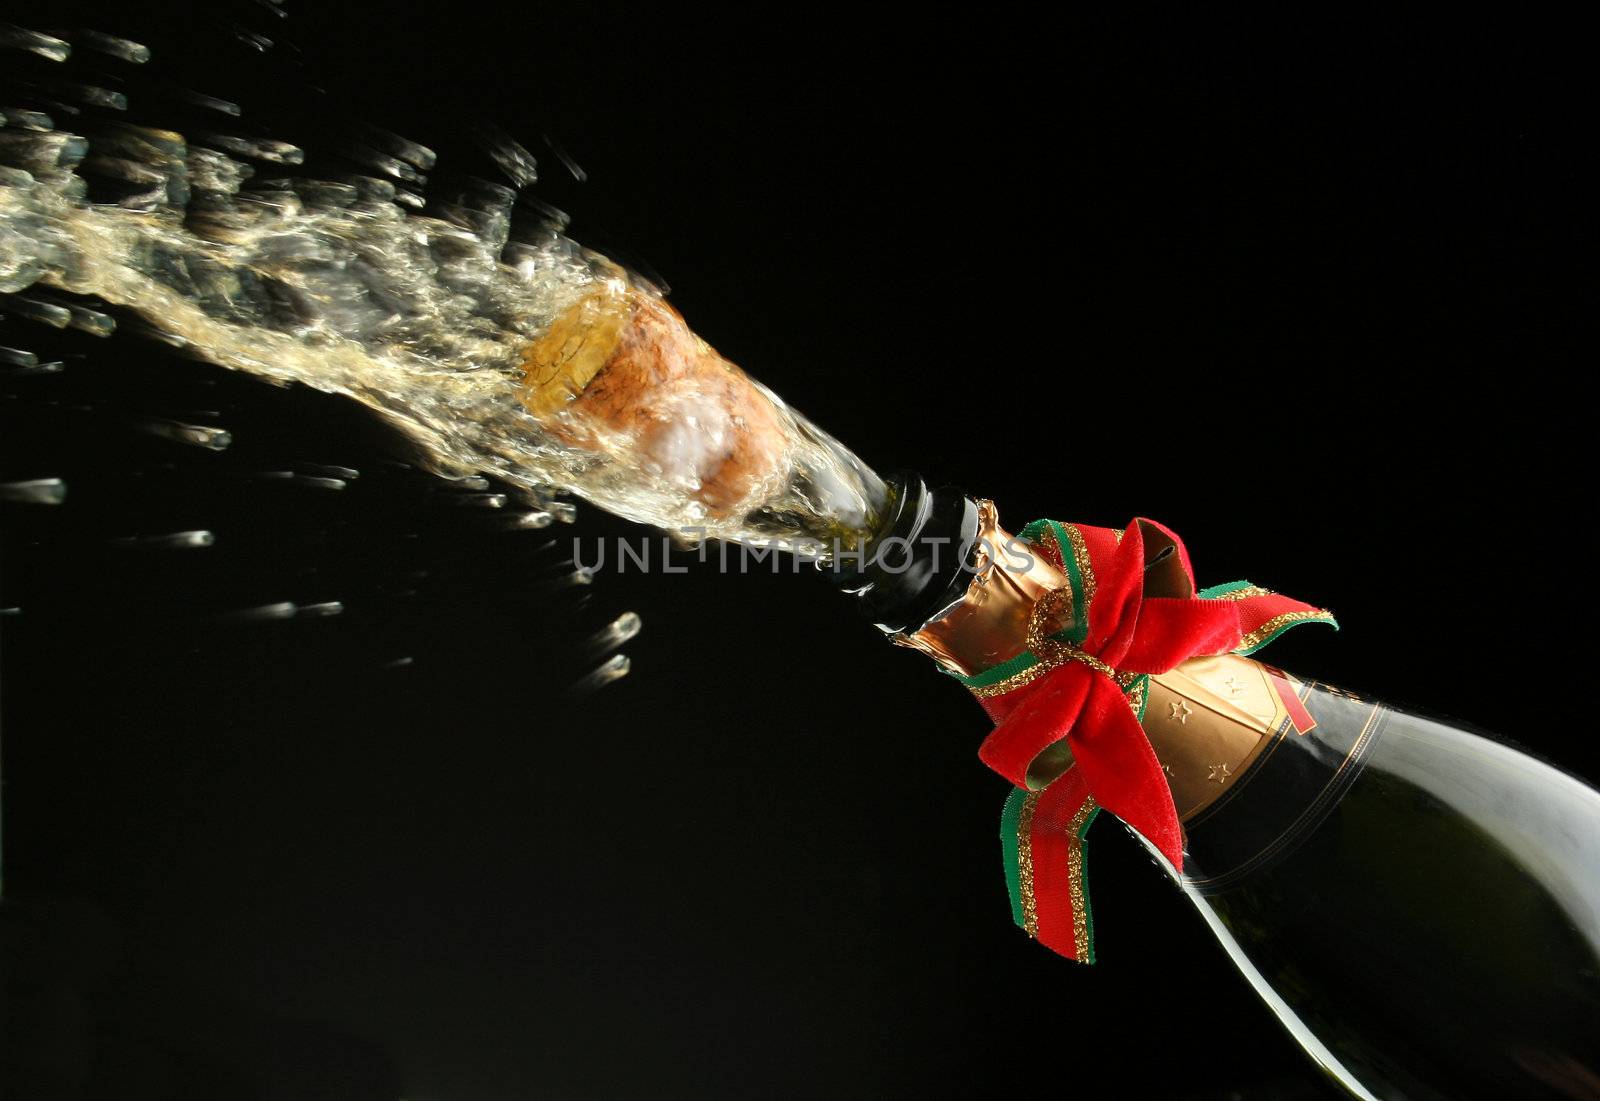 Champagne splash. Bottle and cork, with christmas decoration